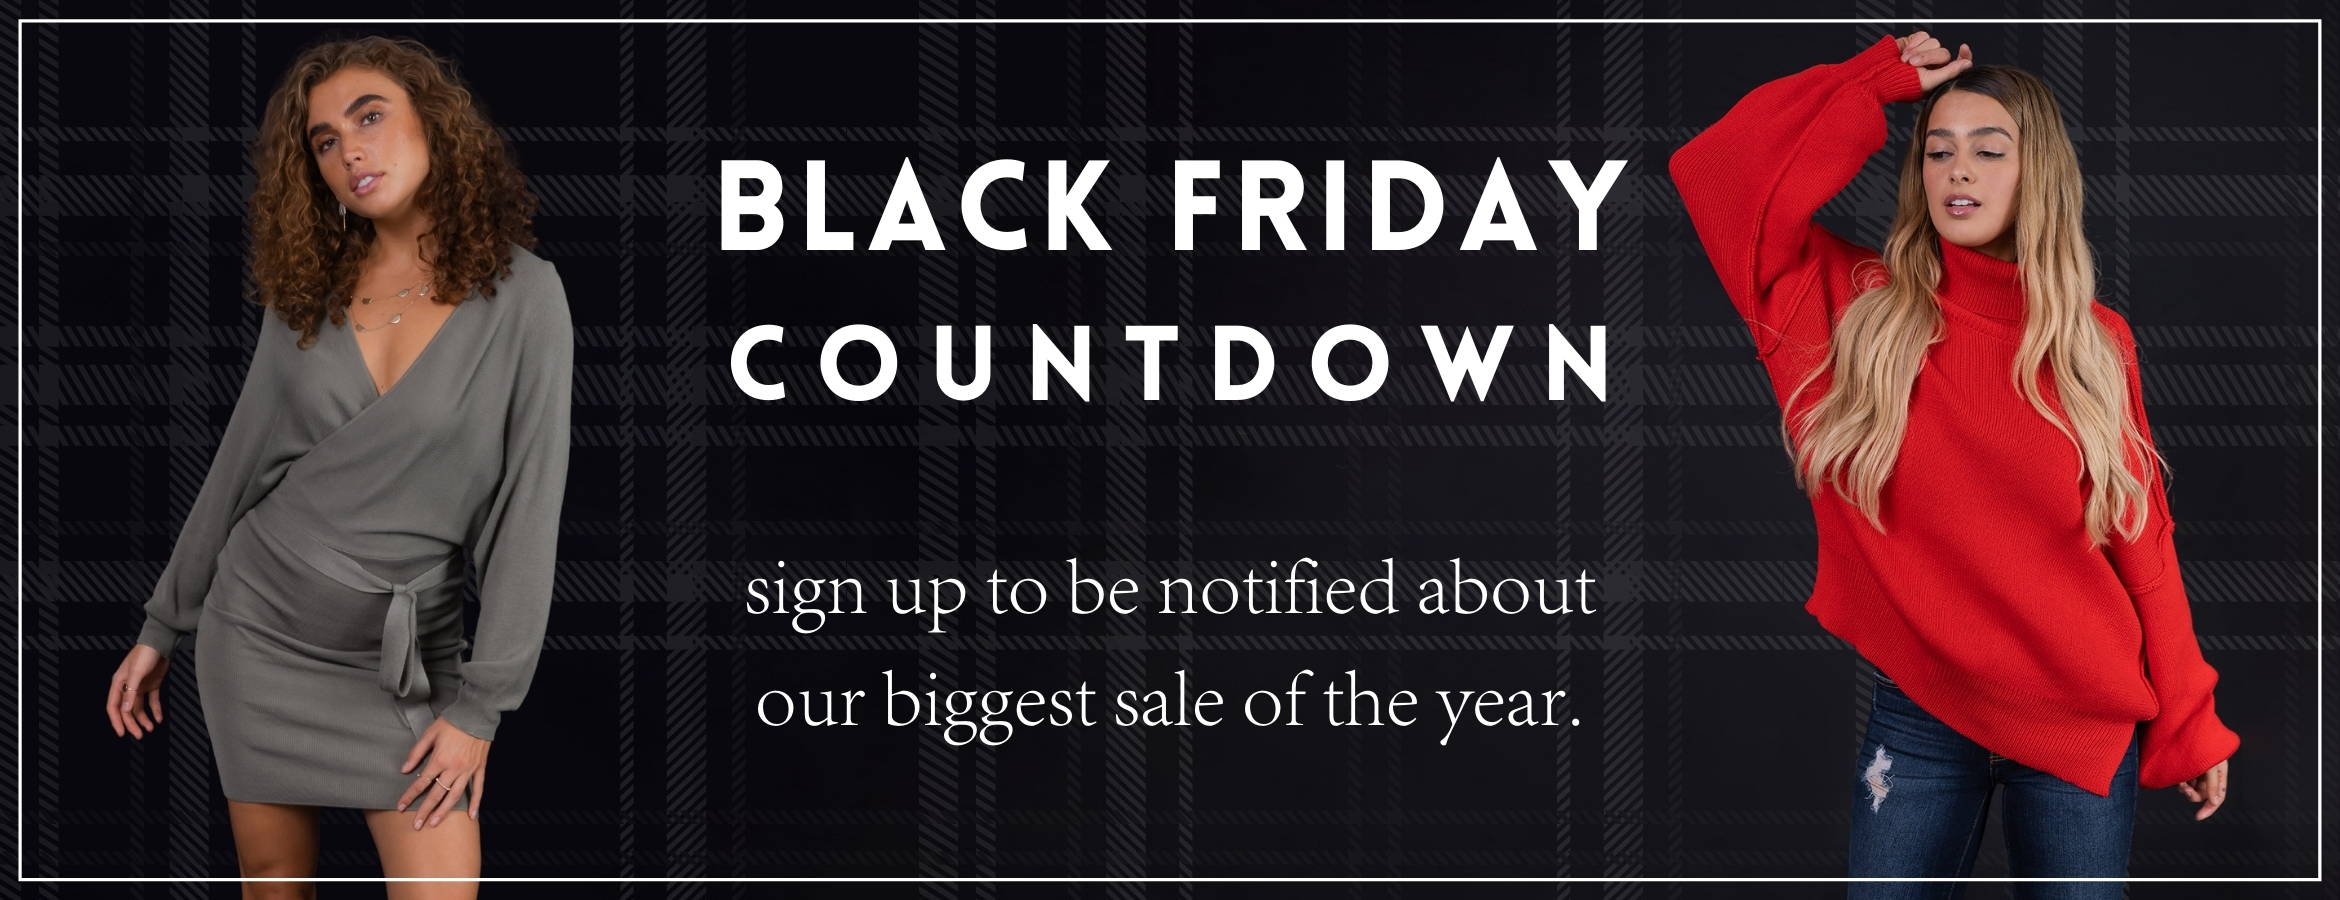 Black Friday Countdown at Bella Ella Boutique. Sign up to be notified about our biggest sale of the year.